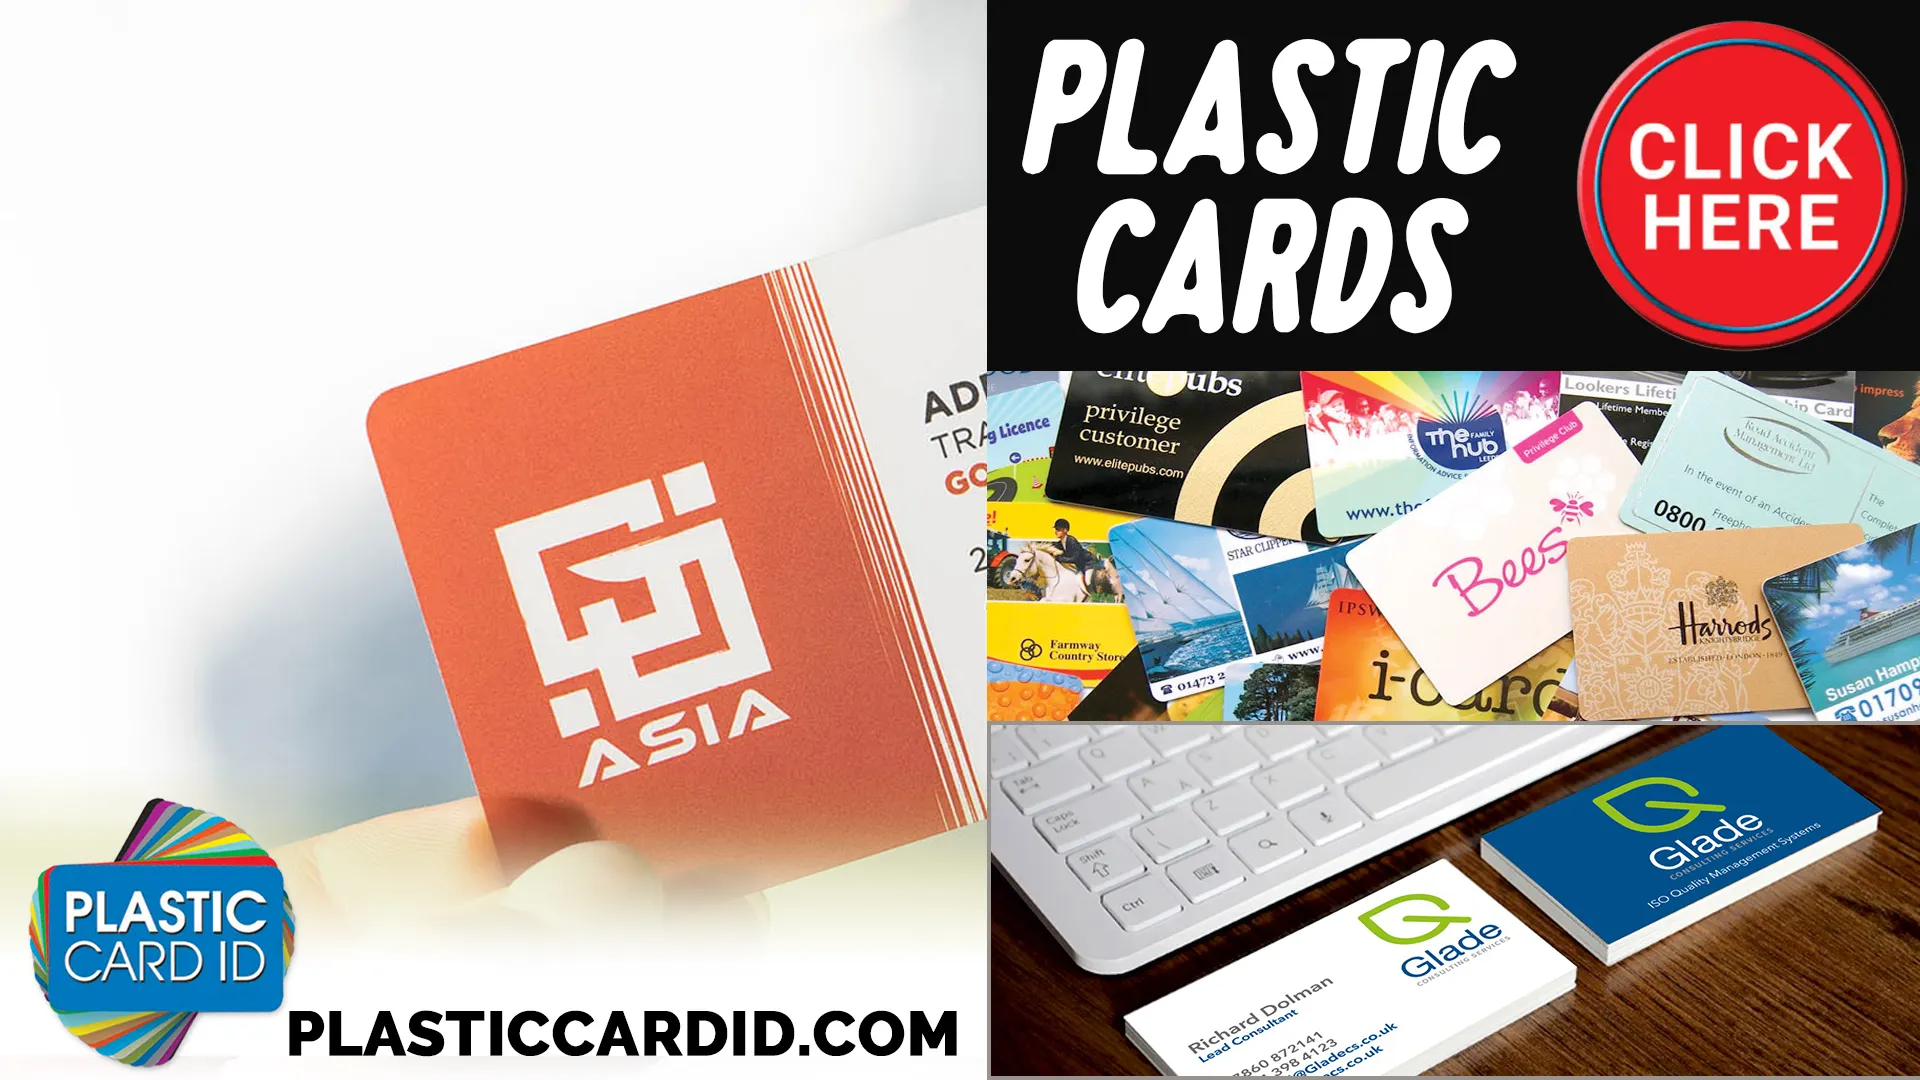 Welcome to Plastic Card ID




: Your Partner in Global Card Solutions